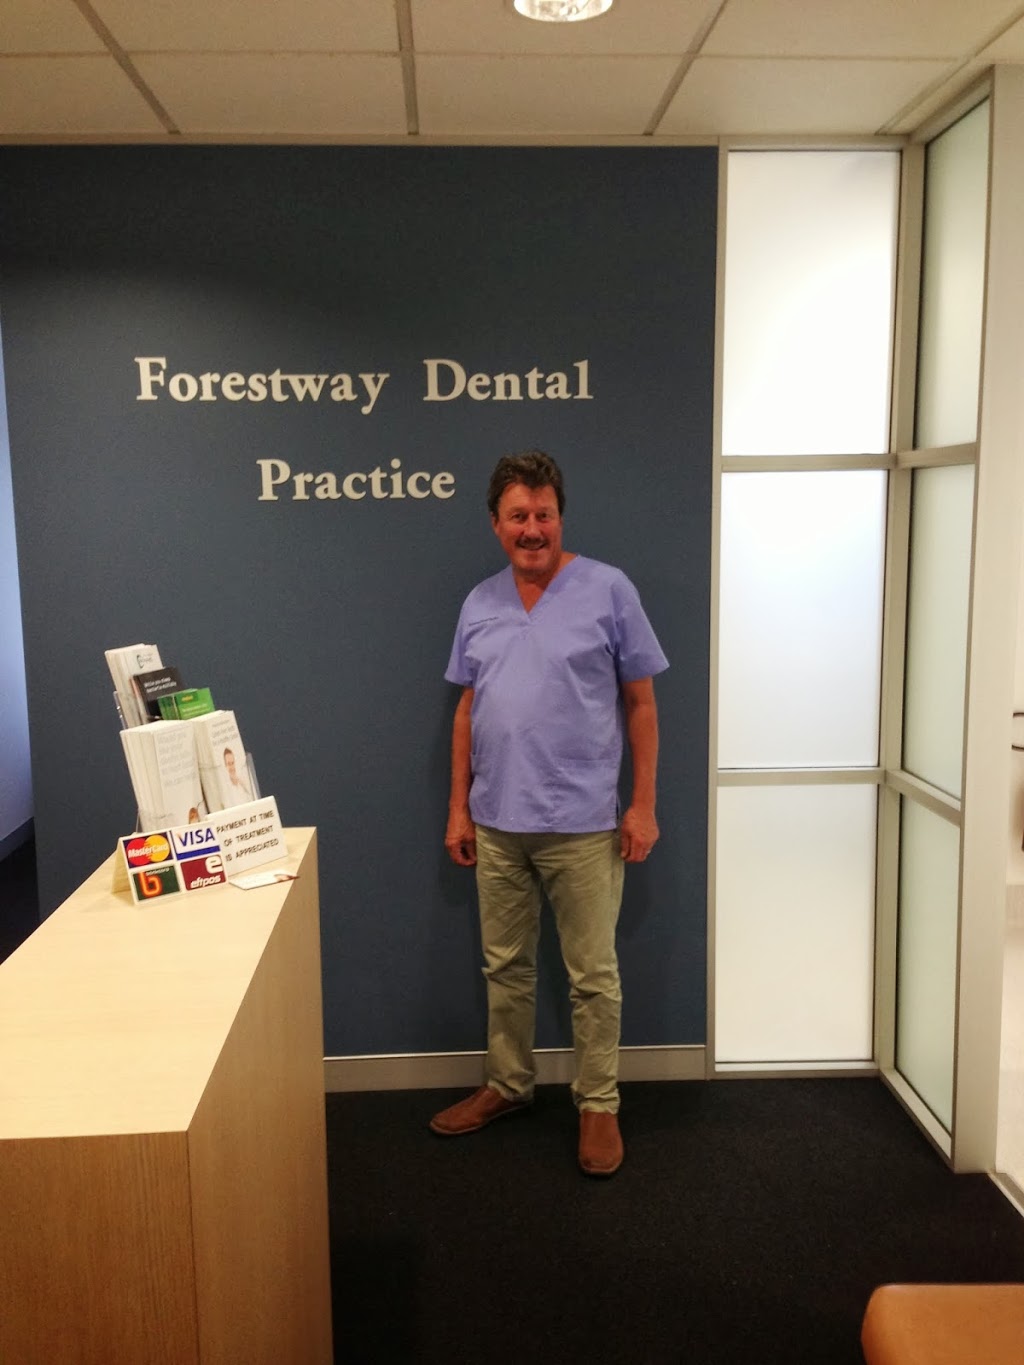 Forestway Dental Practice | Suite 13, Bld, 7/49 Frenchs Forest Rd E, Frenchs Forest NSW 2086, Australia | Phone: (02) 9451 6566